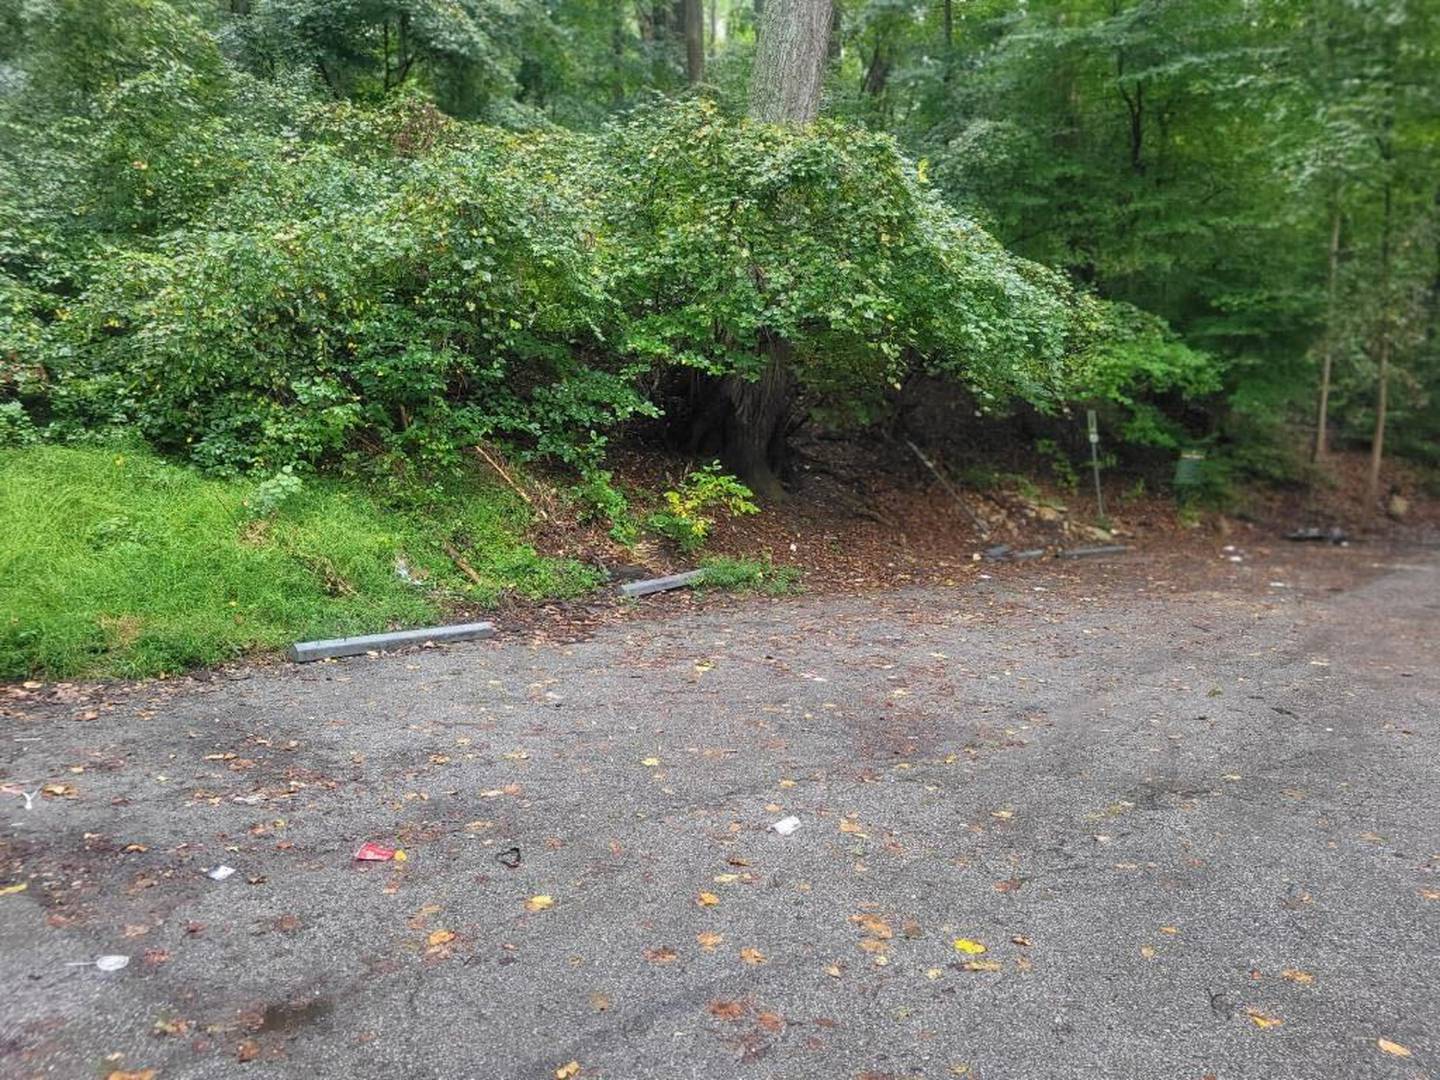 The body of a man abducted from Anne Arundel County was found in the trunk of a burning car at this site in Leakin Park. This image was taken on Thursday morning, September 22, 2022.